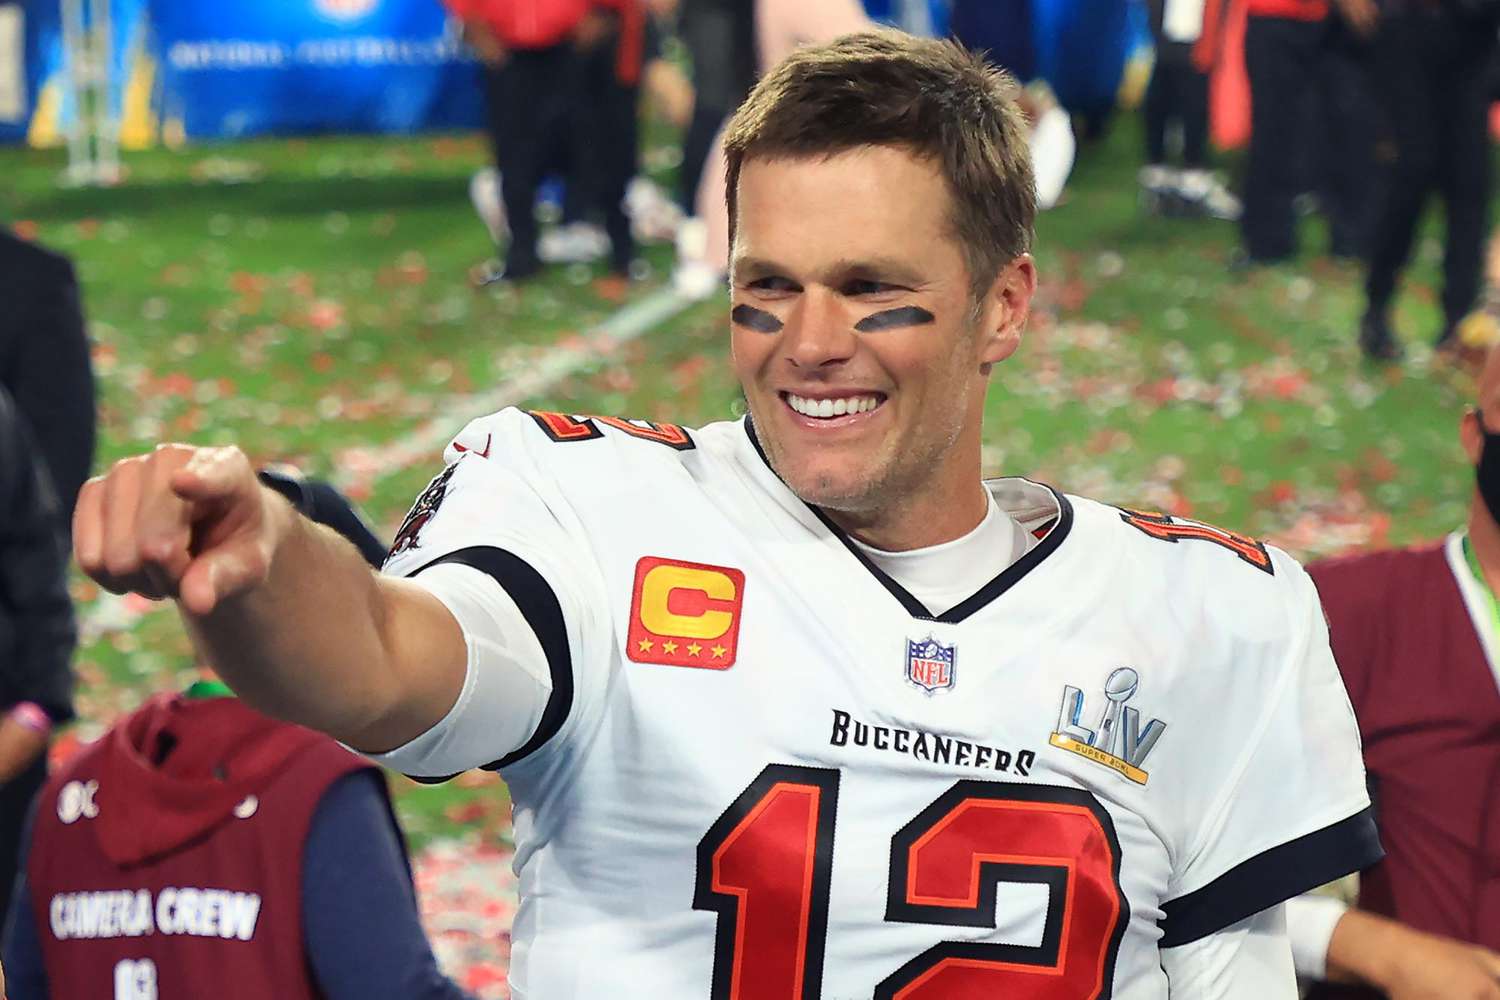 Tom Brady #12 of the Tampa Bay Buccaneers celebrates after defeating the Kansas City Chiefs in Super Bowl LV at Raymond James Stadium on February 07, 2021 in Tampa, Florida.